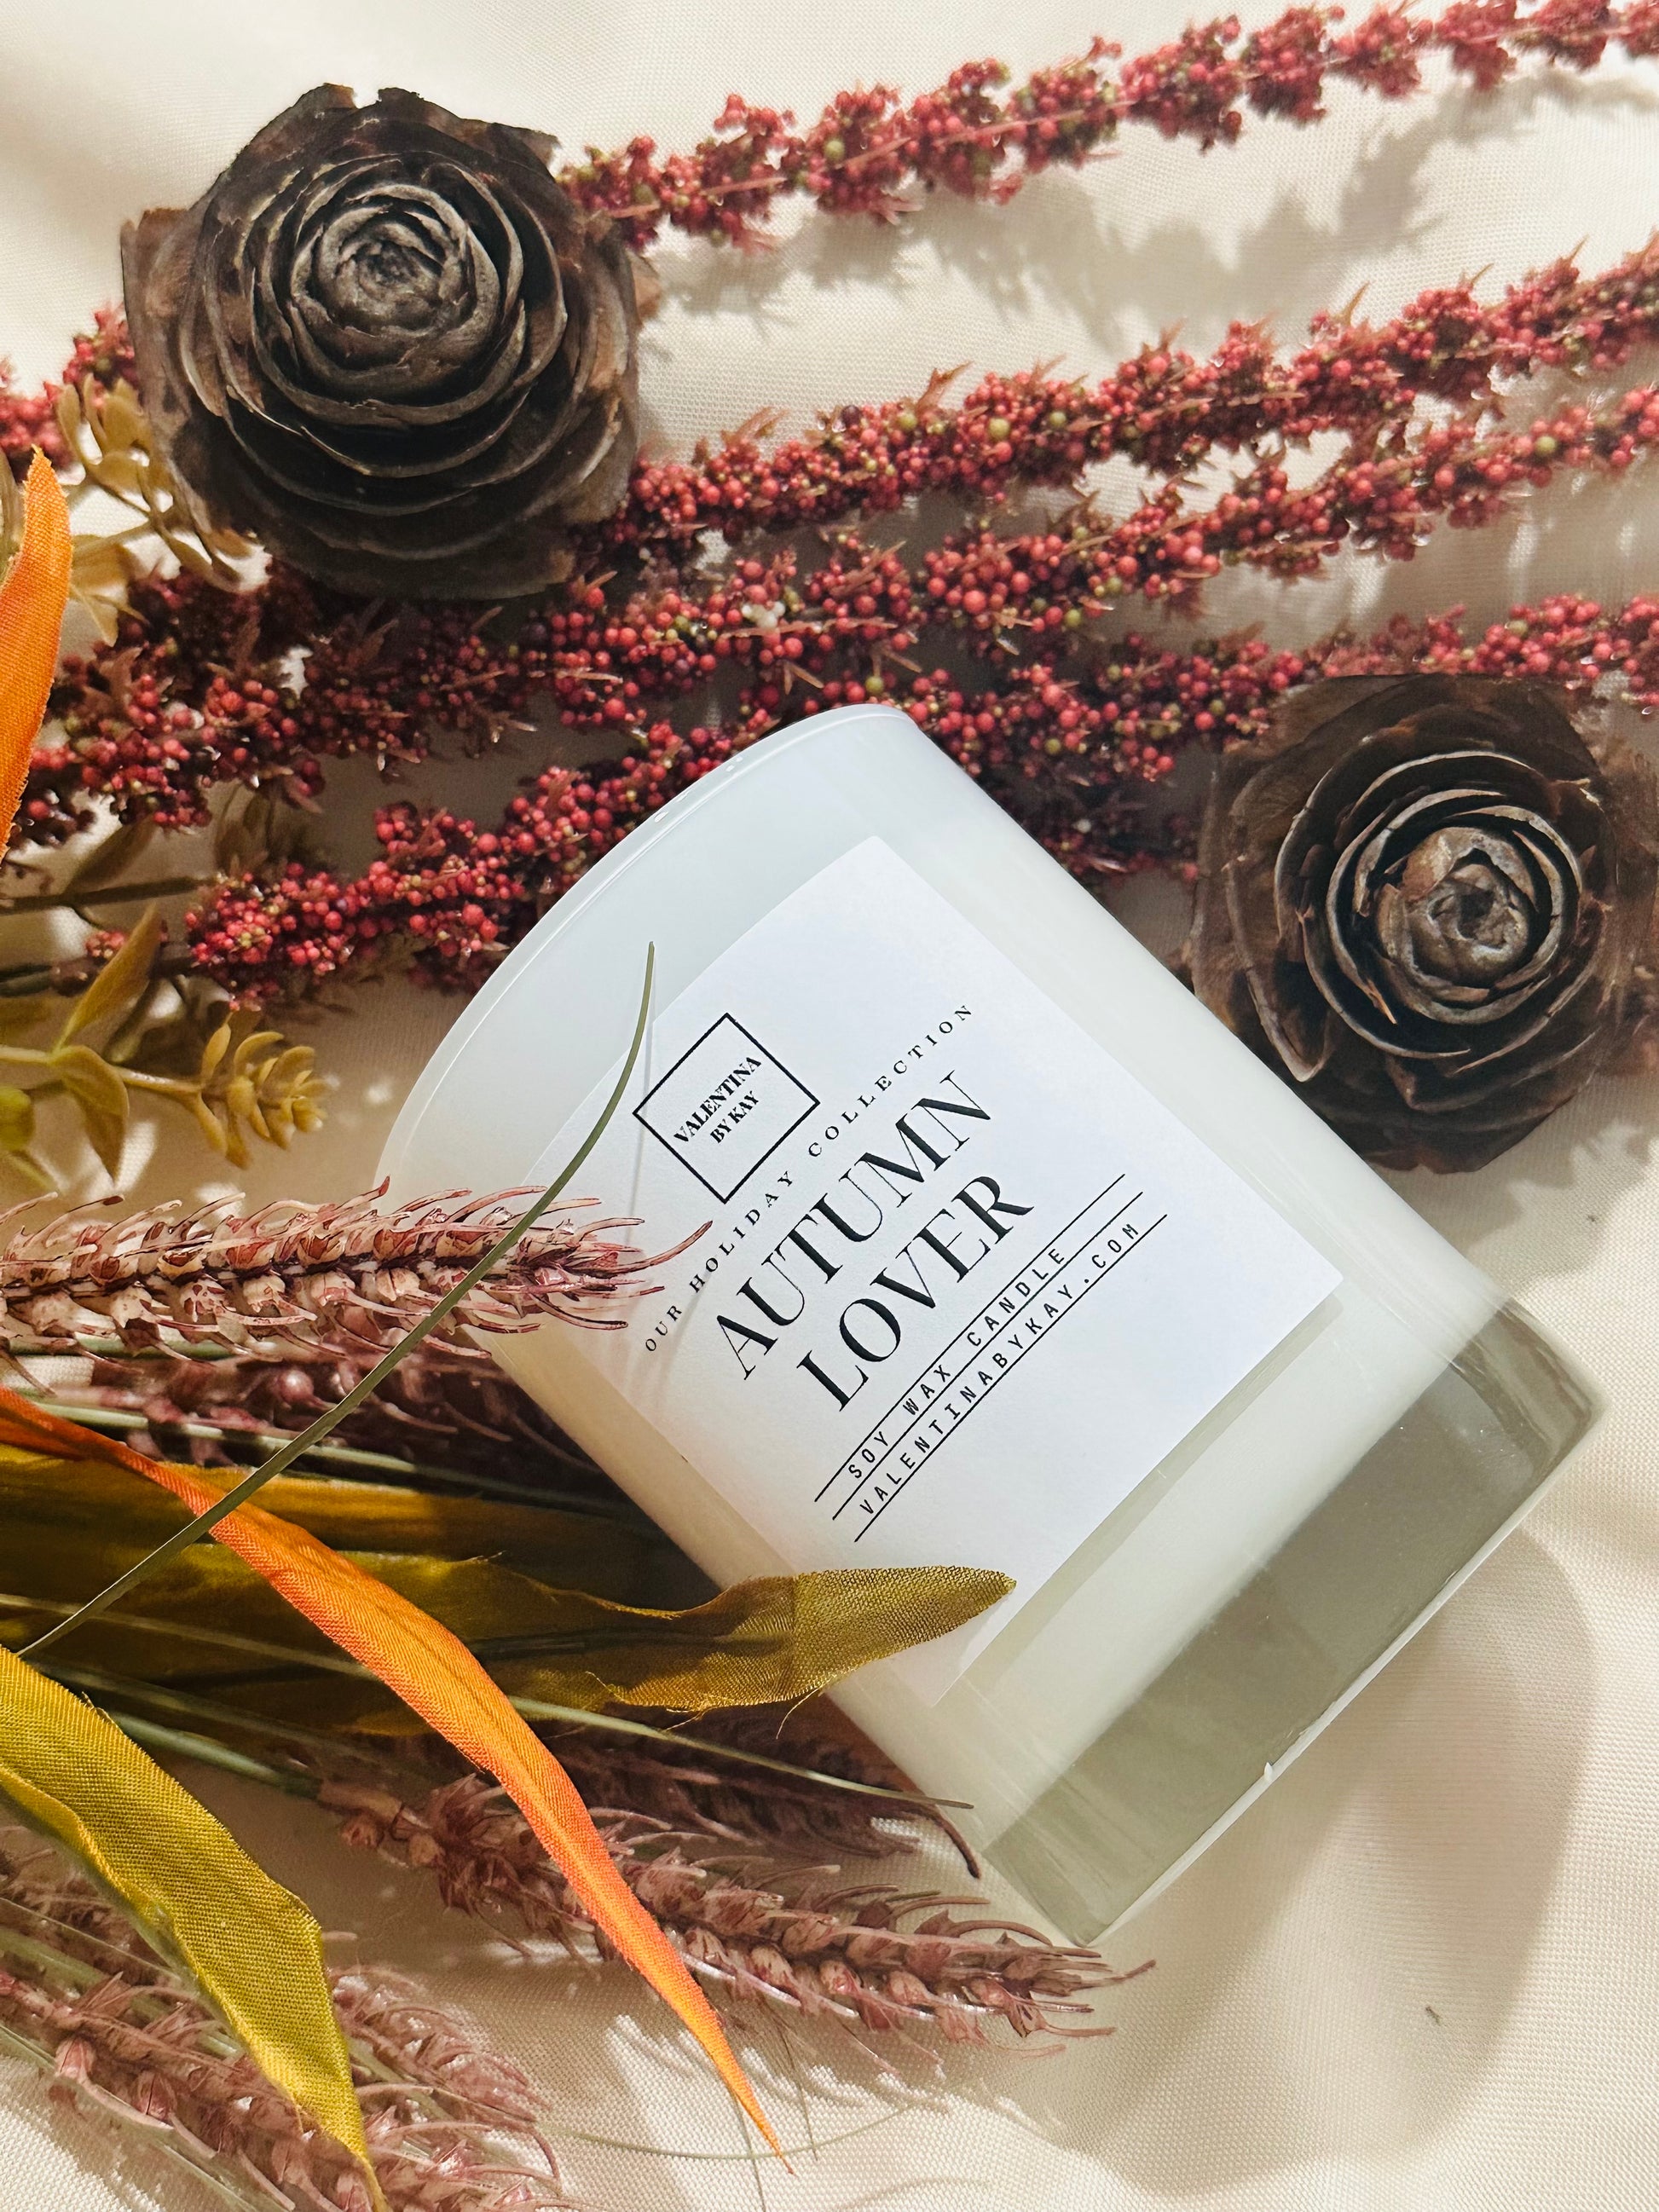 Autumn Leaves Soy Wax Candle — Val Viola Candles, Soy Wax